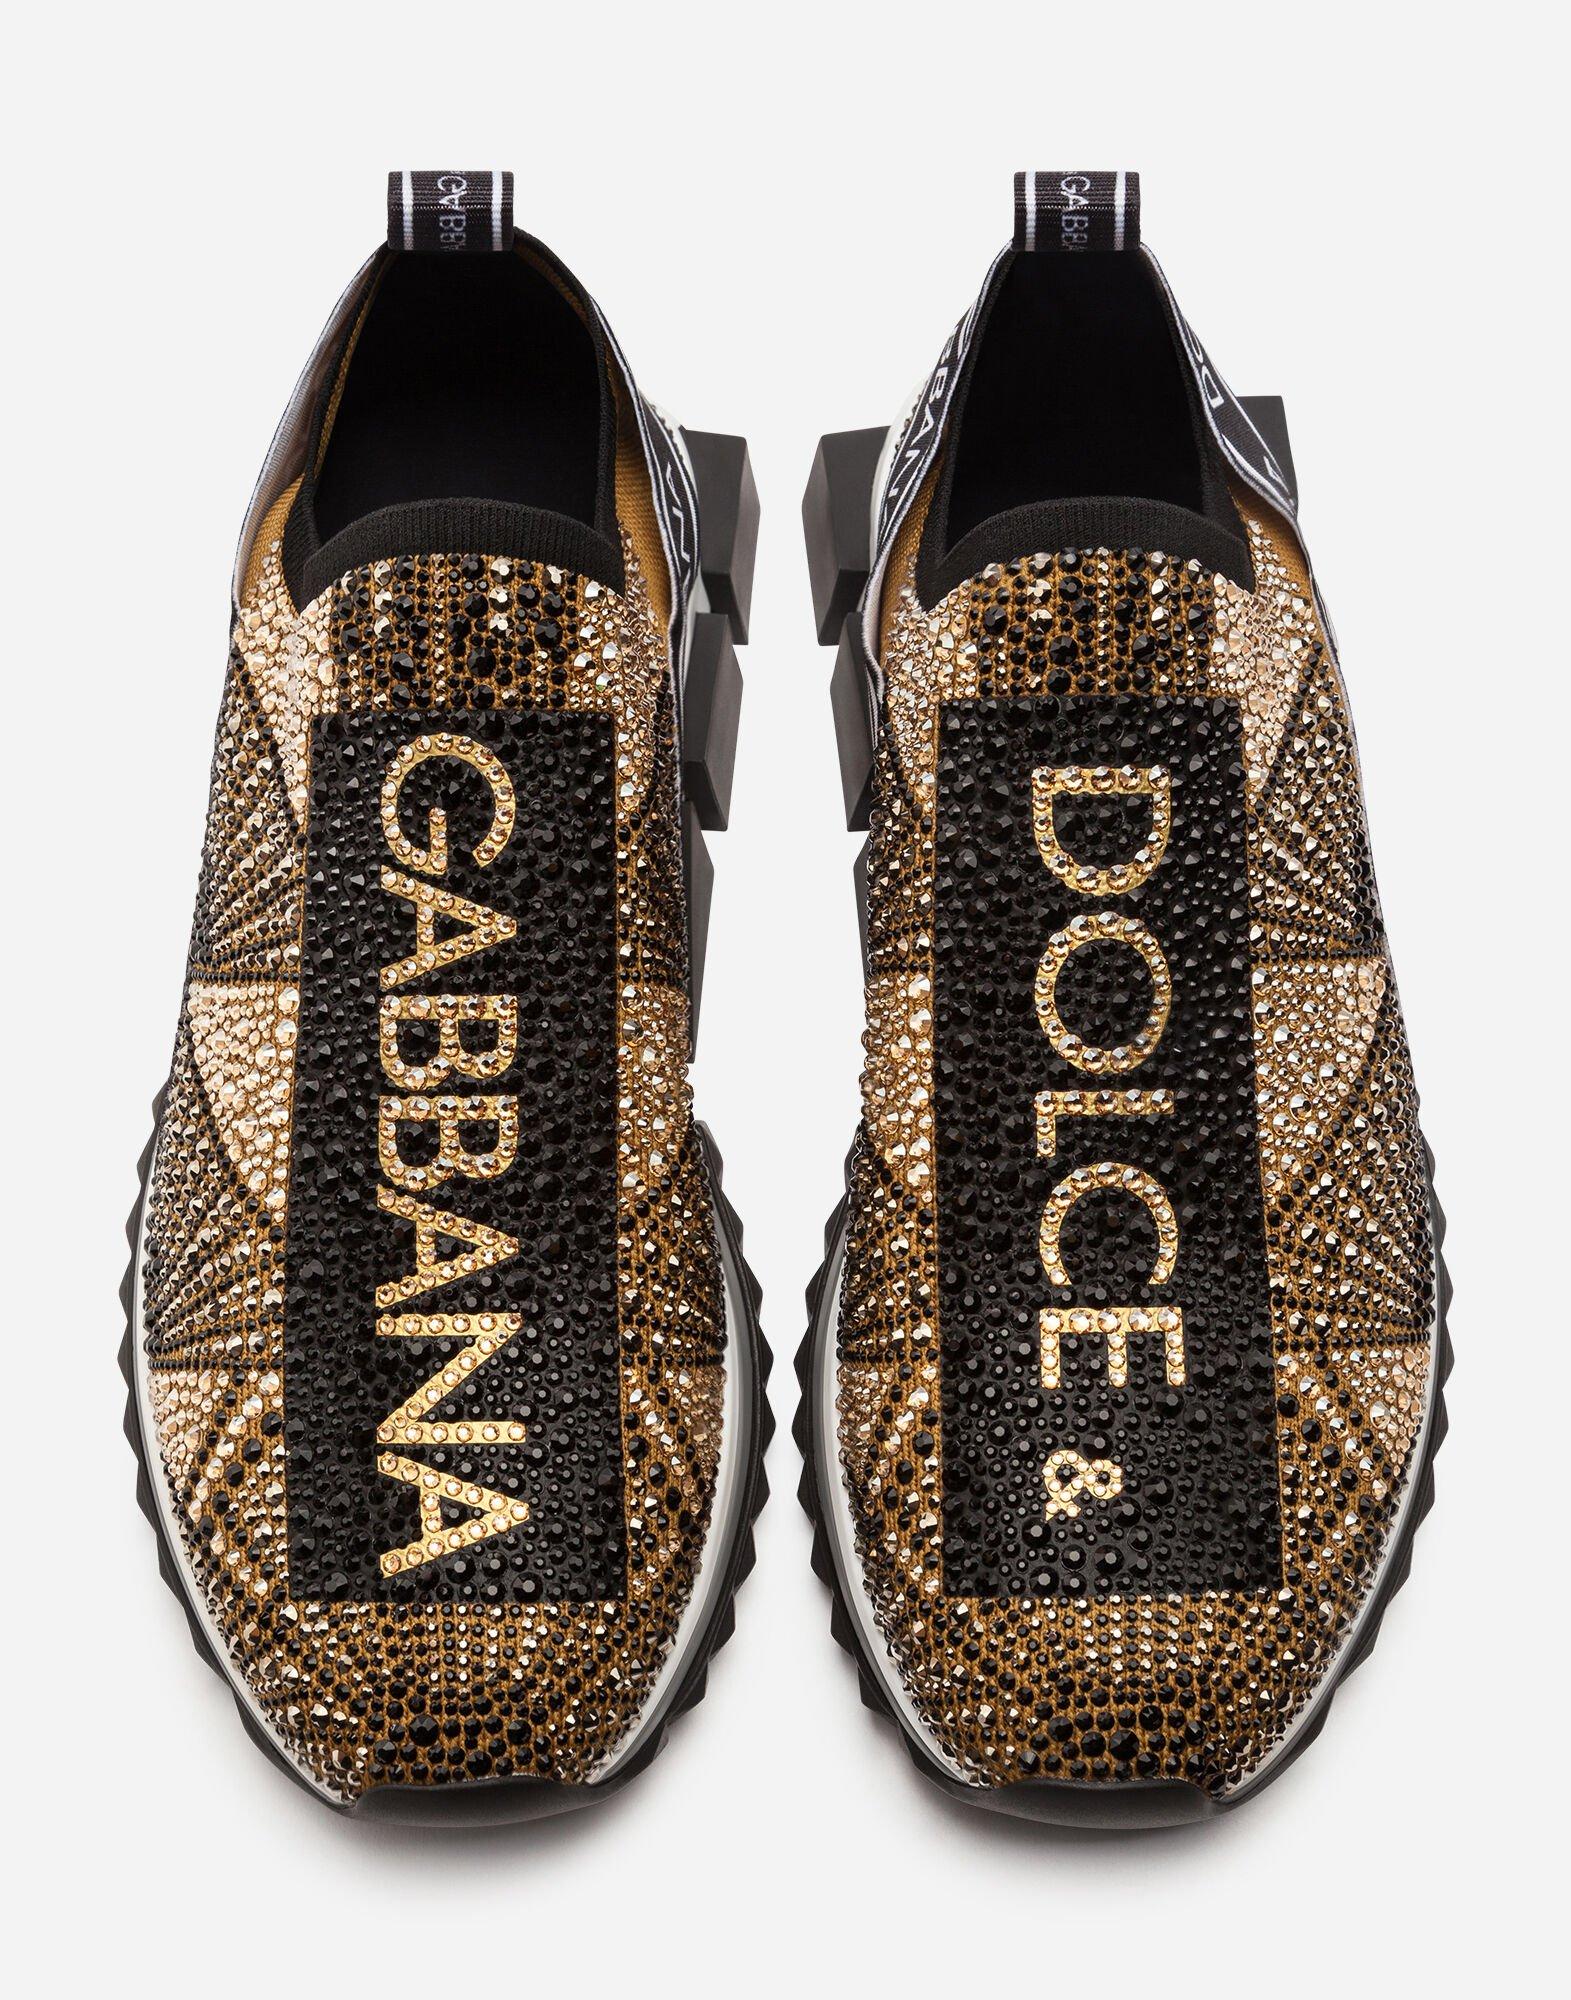 Dolce & Gabbana Synthetic Sorrento Sneakers With Rhinestones for Men - Lyst